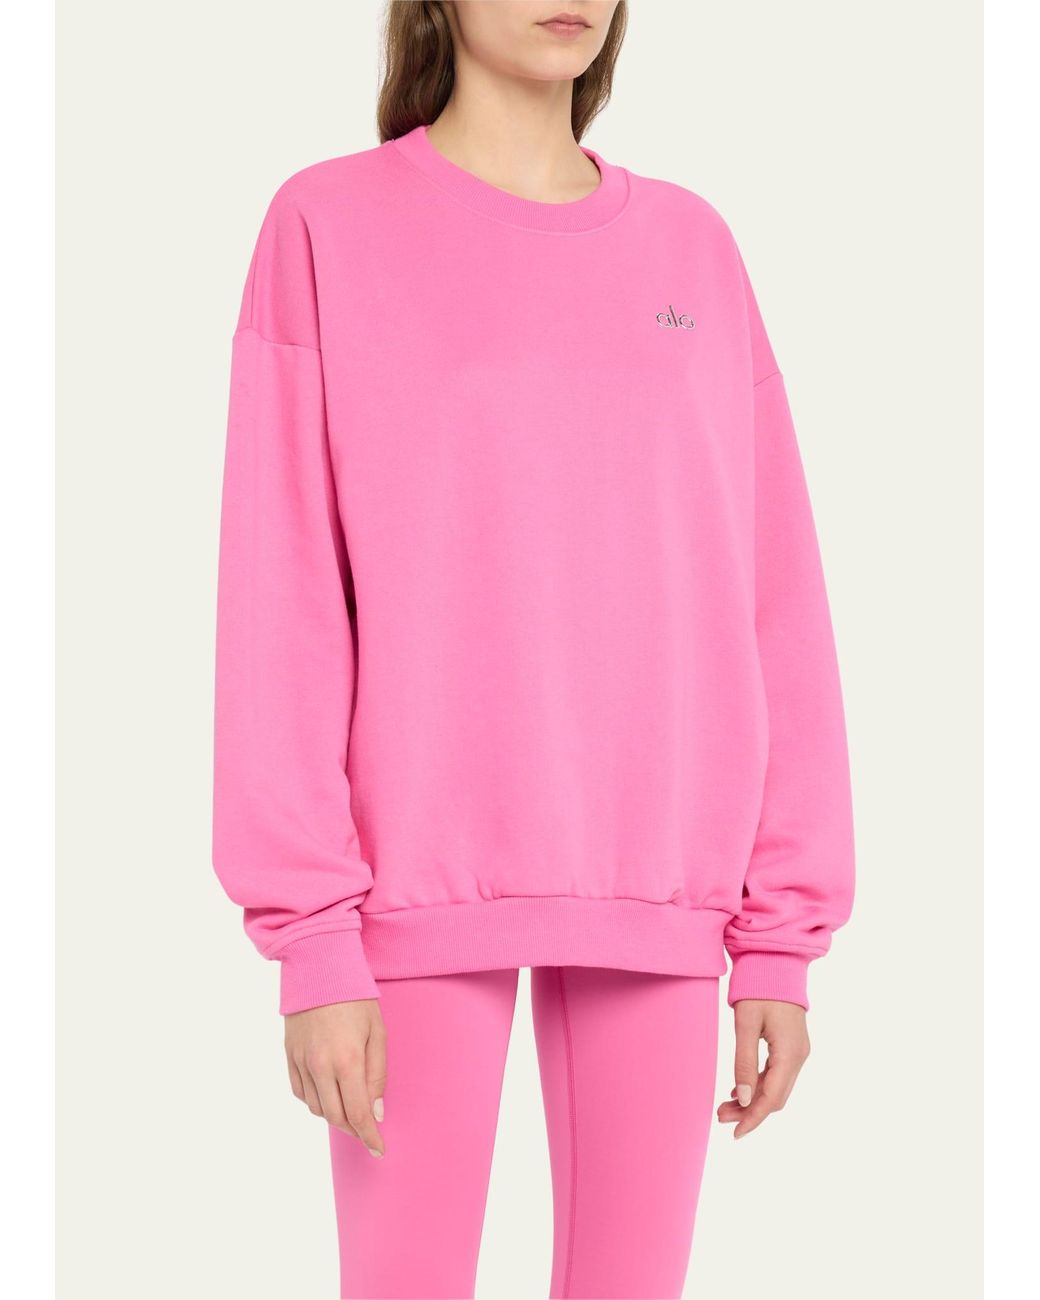 Accolade Hoodie in Pink Sugar by Alo Yoga